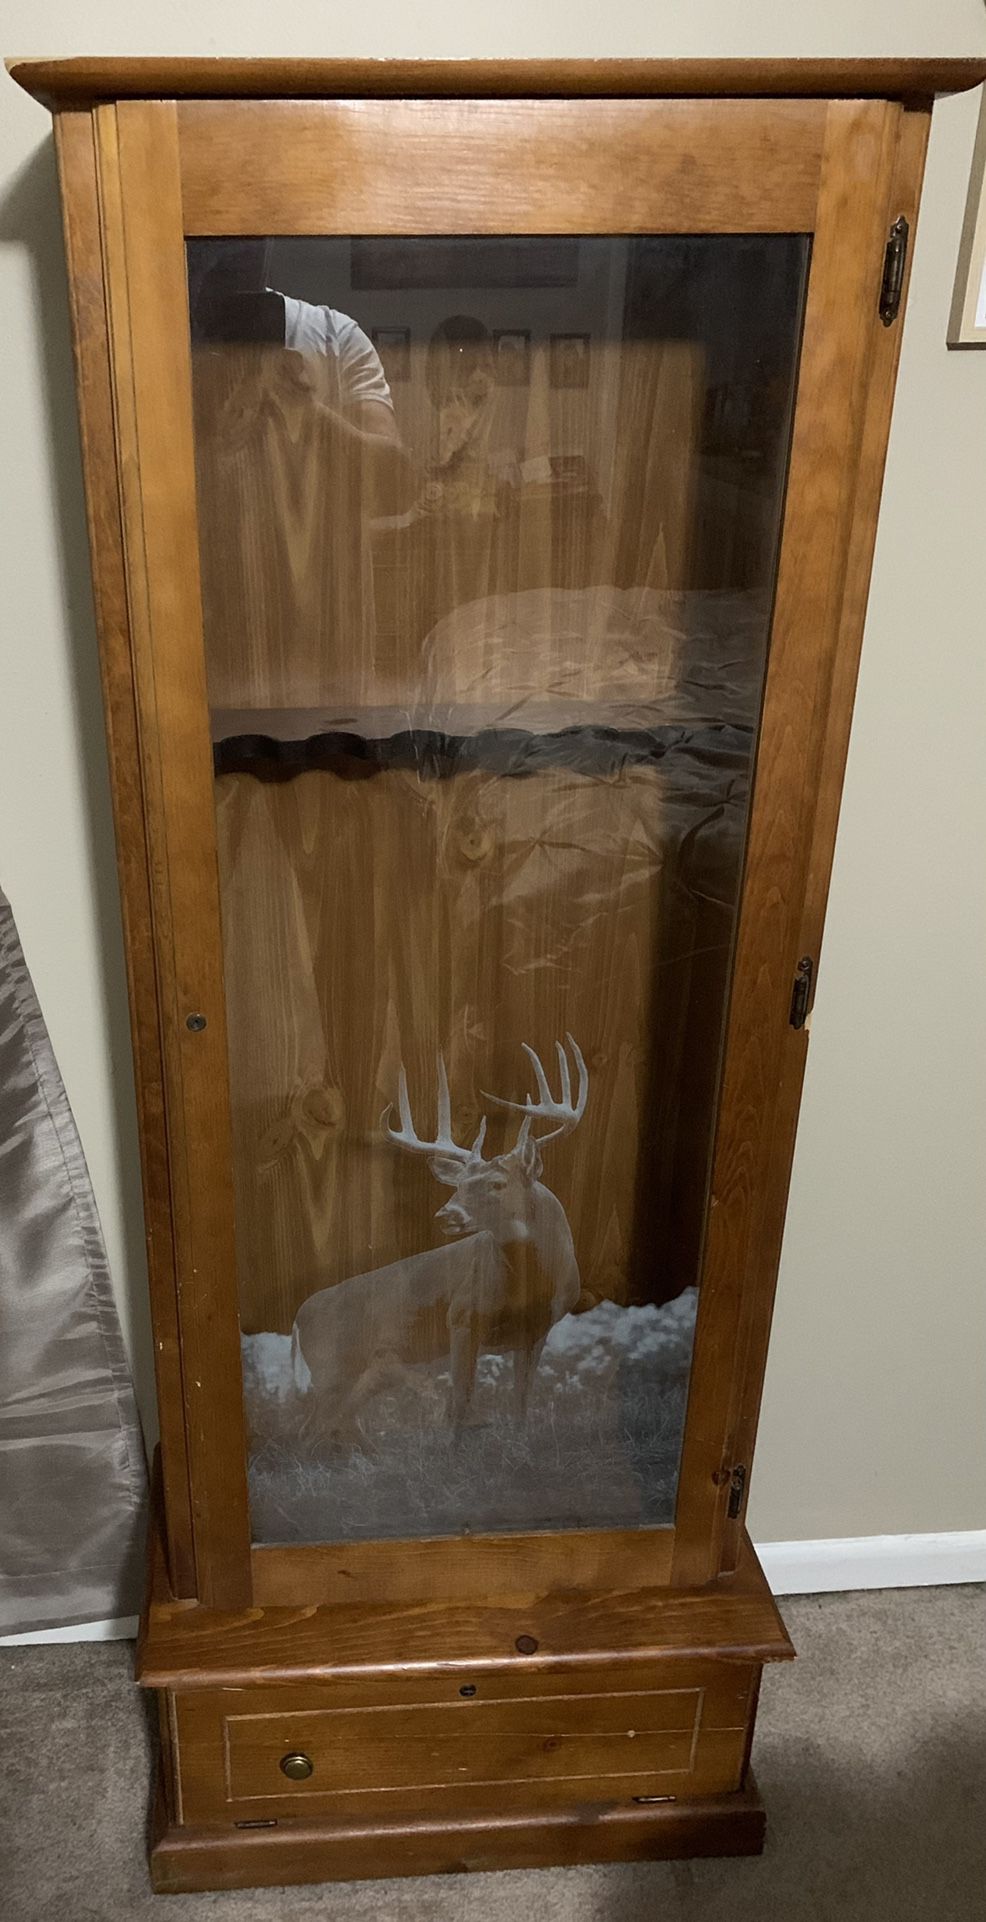 Gun cabinet (holds 6 plus guns), wooden with deer frosted decorative glass display with lock and storage below with lock. Bottom storage wooden door i